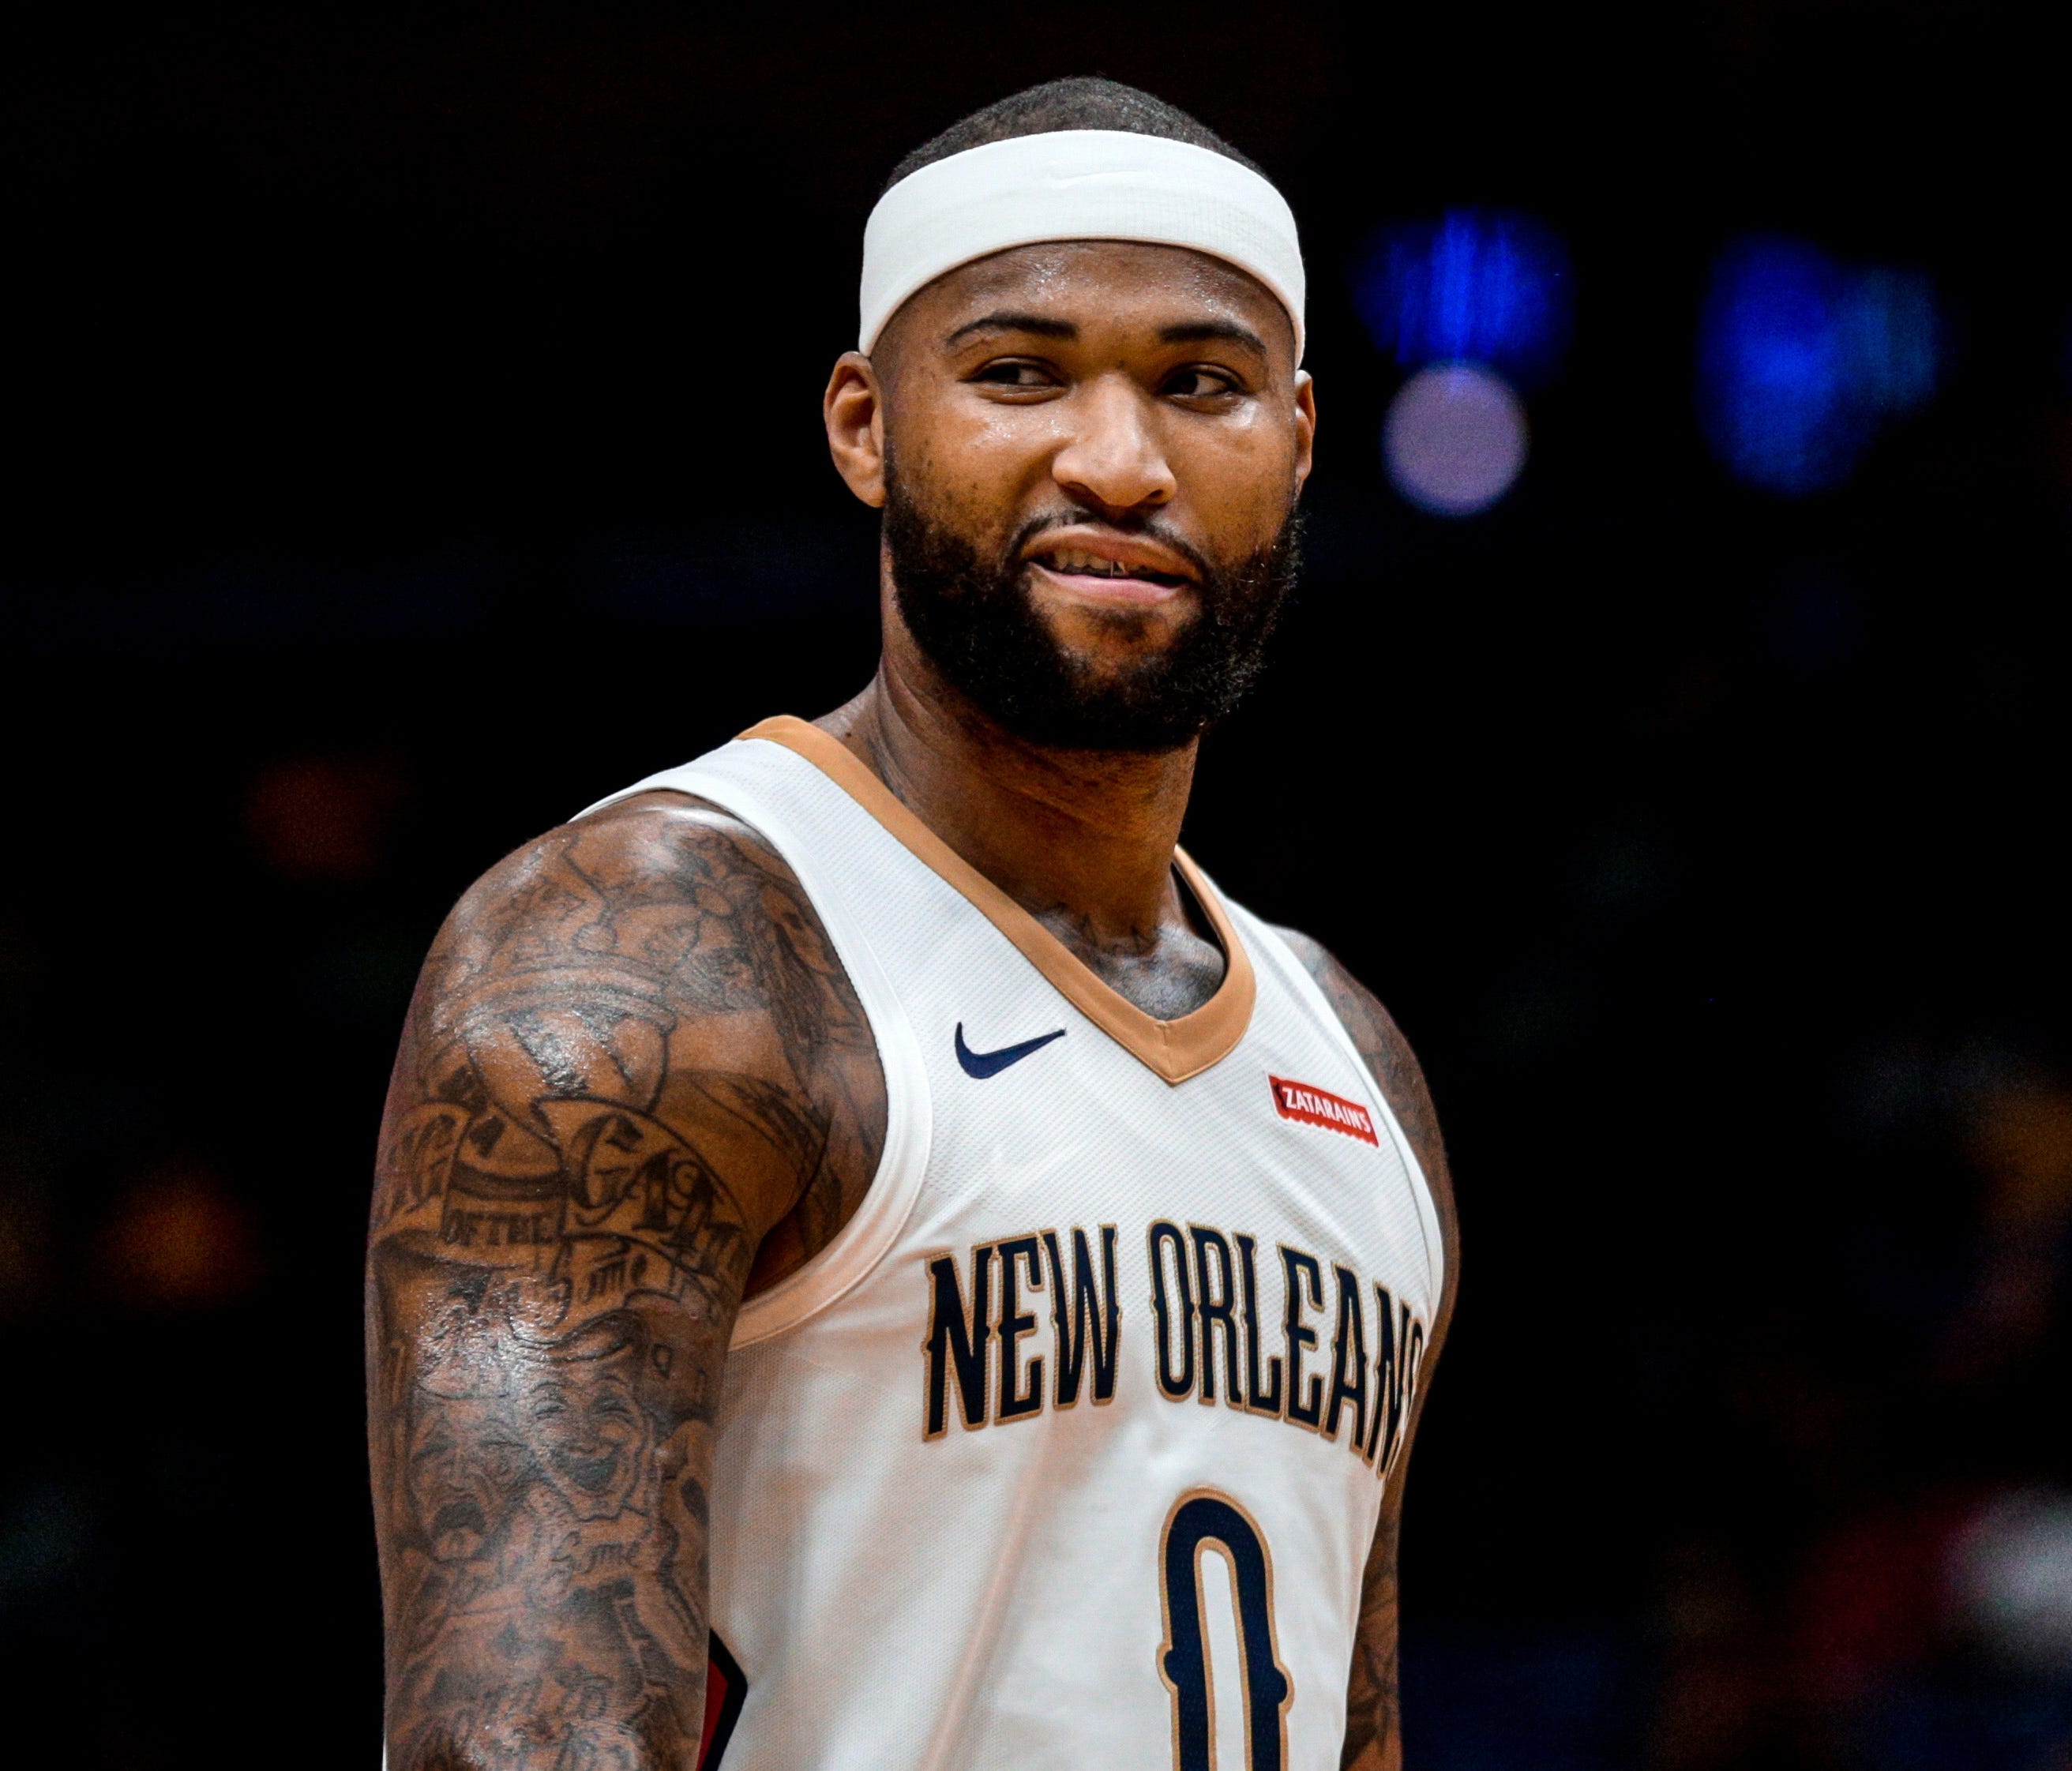 New Orleans Pelicans center DeMarcus Cousins looks on against the Detroit Pistons during the first quarter at the Smoothie King Center.